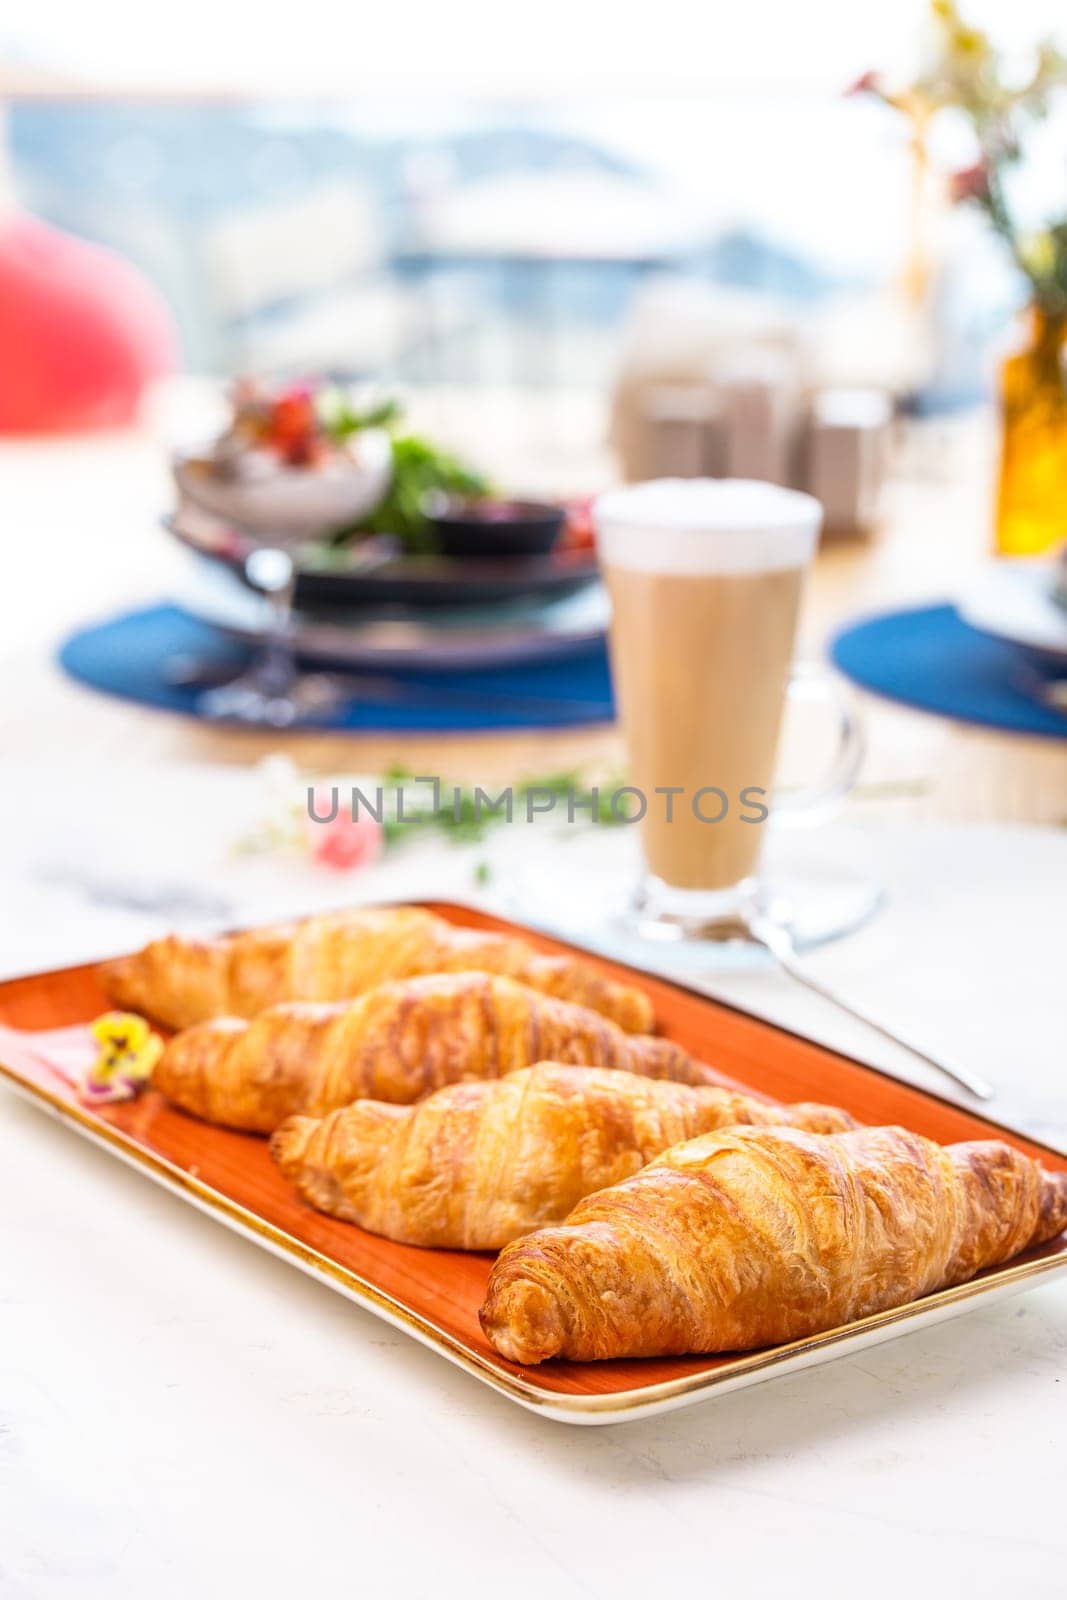 Four golden croissants on an orange plate with a cup of coffee on the side by Pukhovskiy